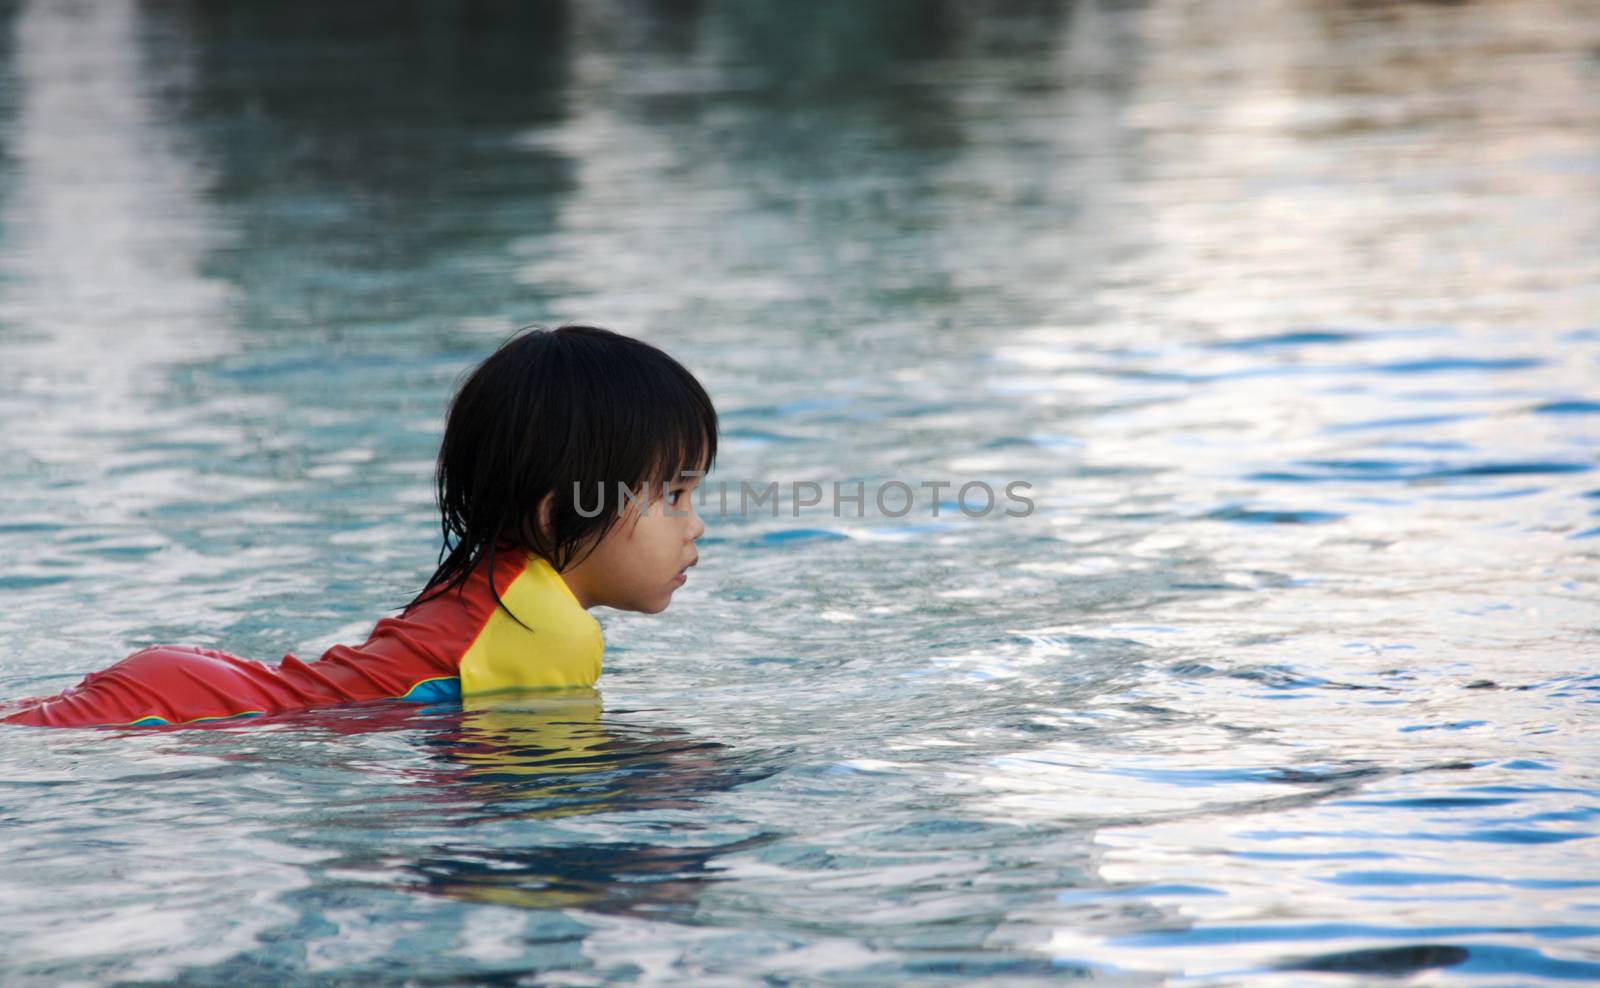 children play onwater in swimimg pool